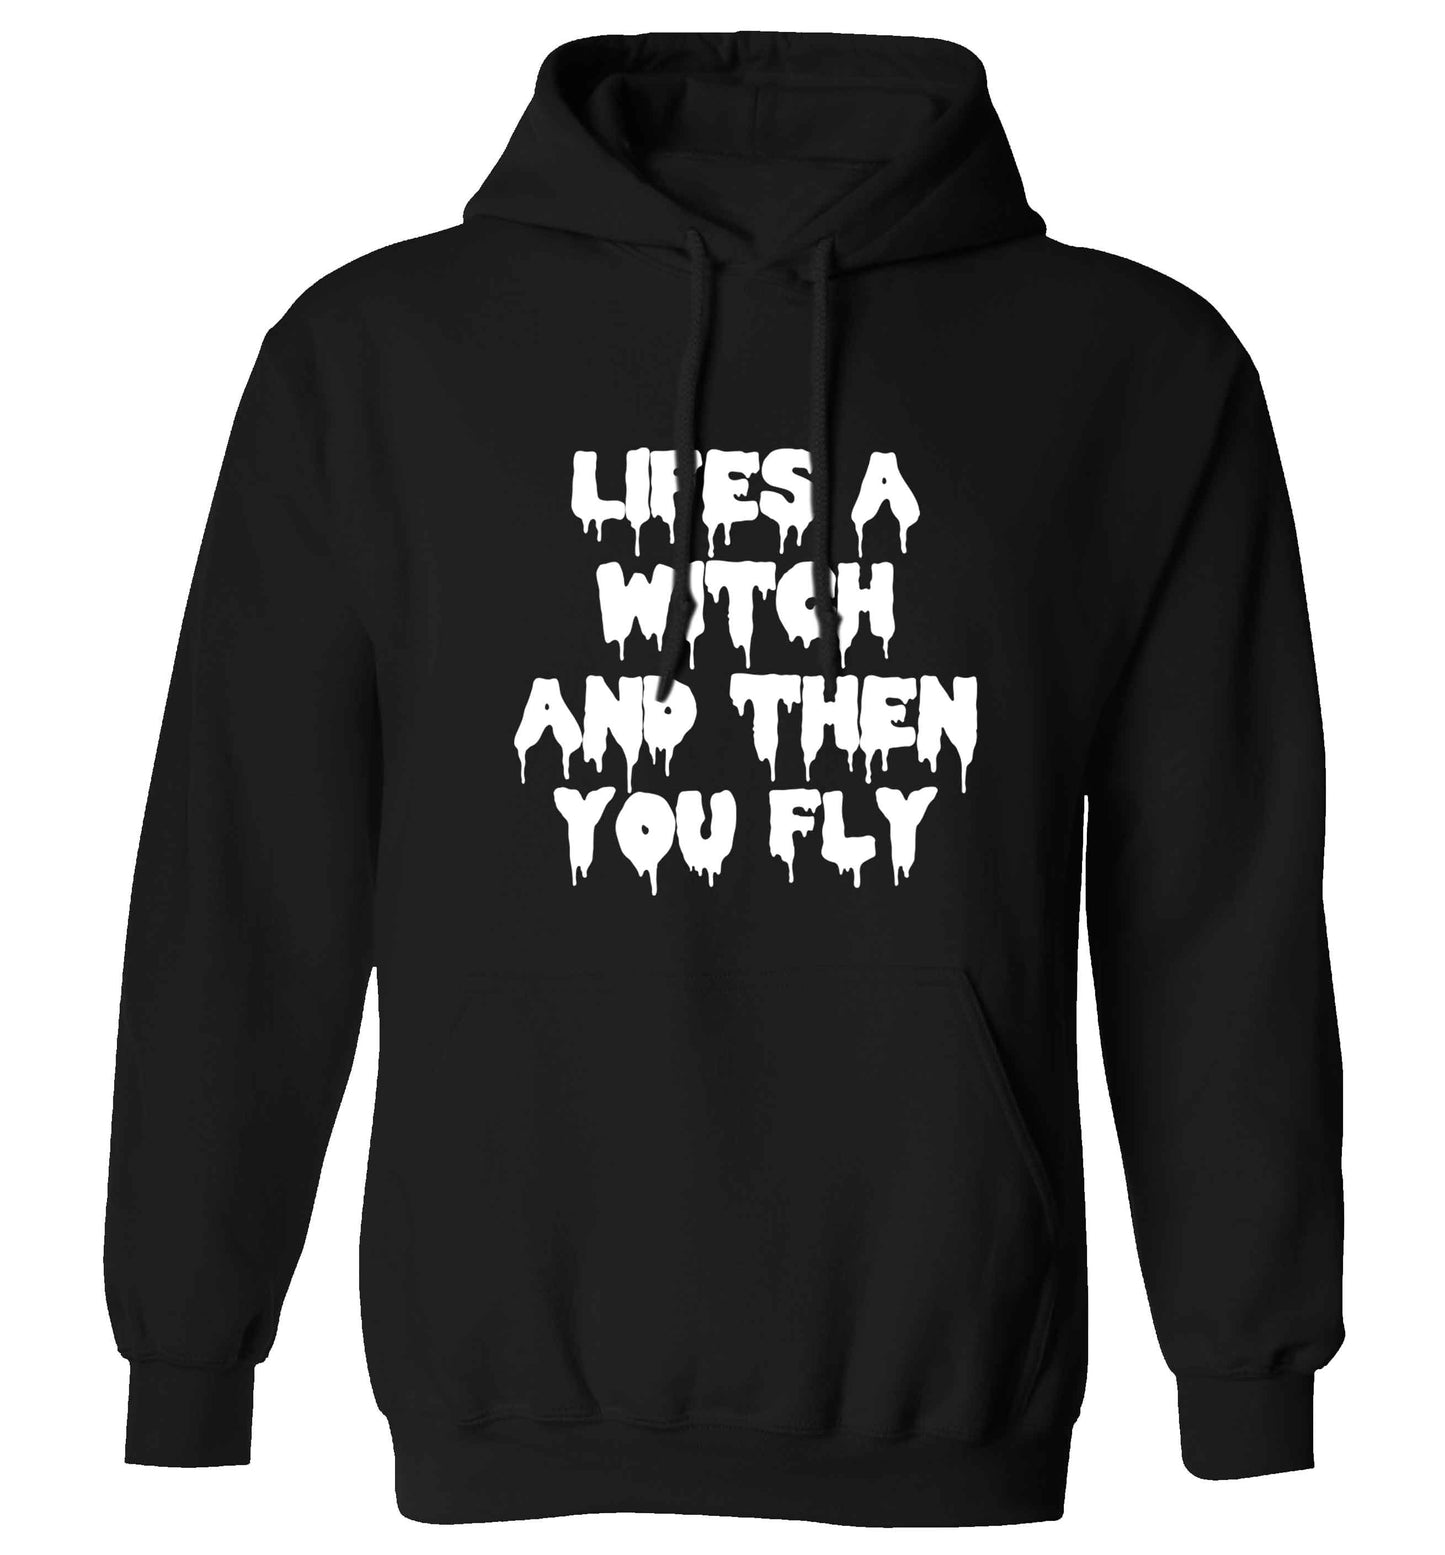 Life's a witch and then you fly adults unisex black hoodie 2XL